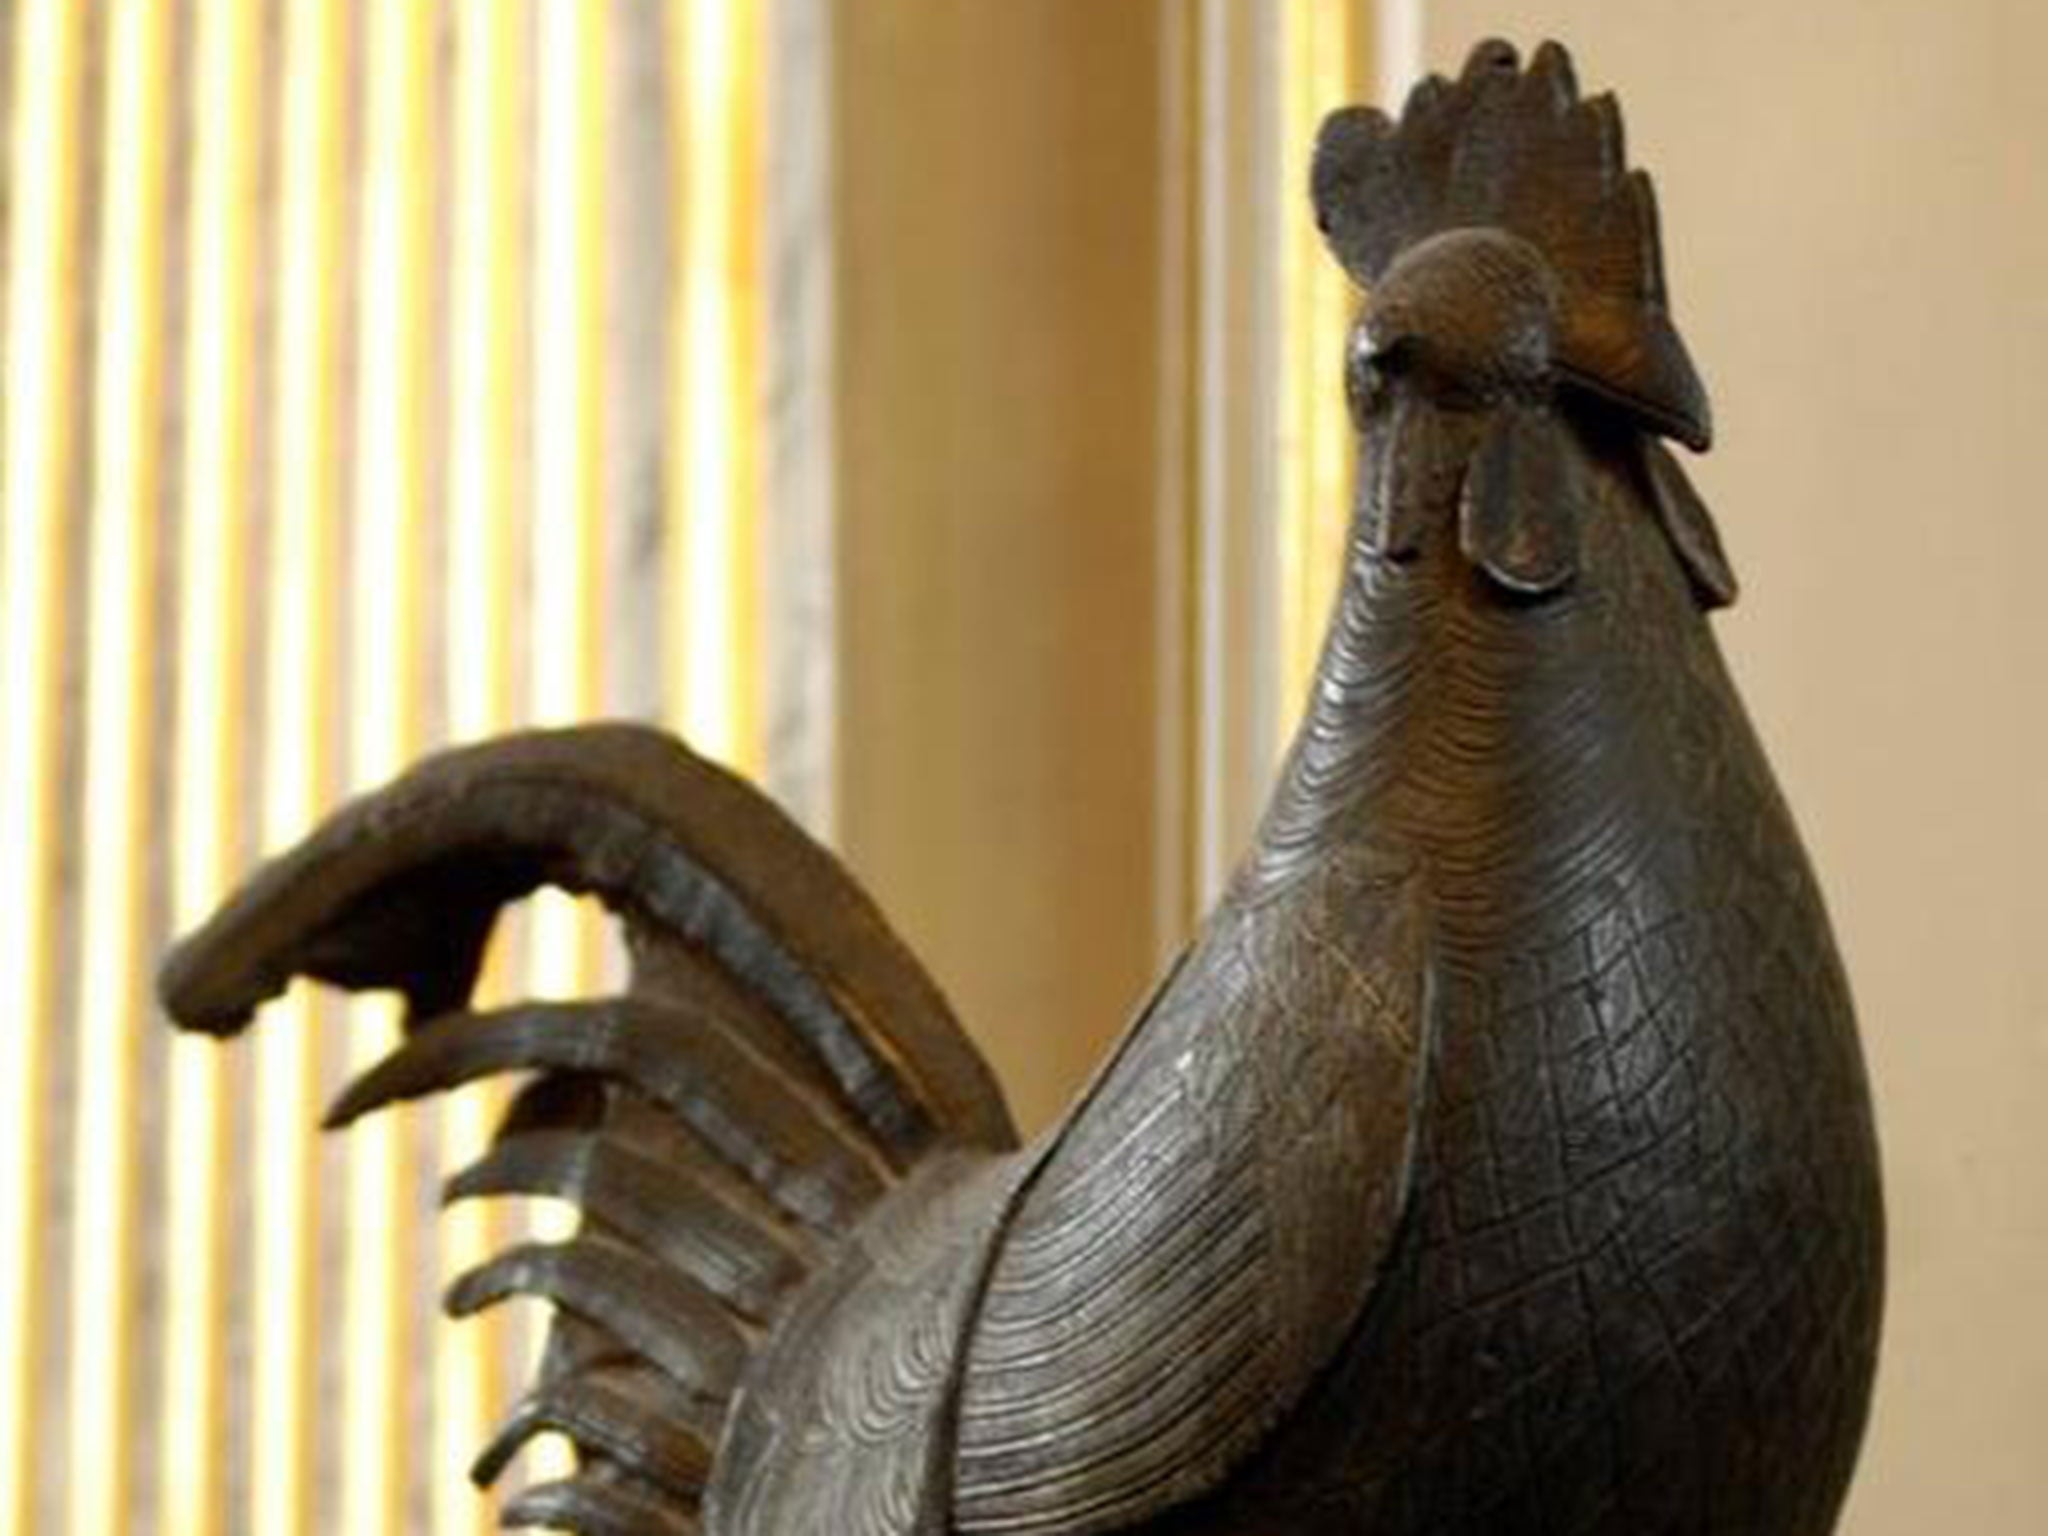 The bronze cockerel was dubbed the ‘new Cecil Rhodes’ by one student